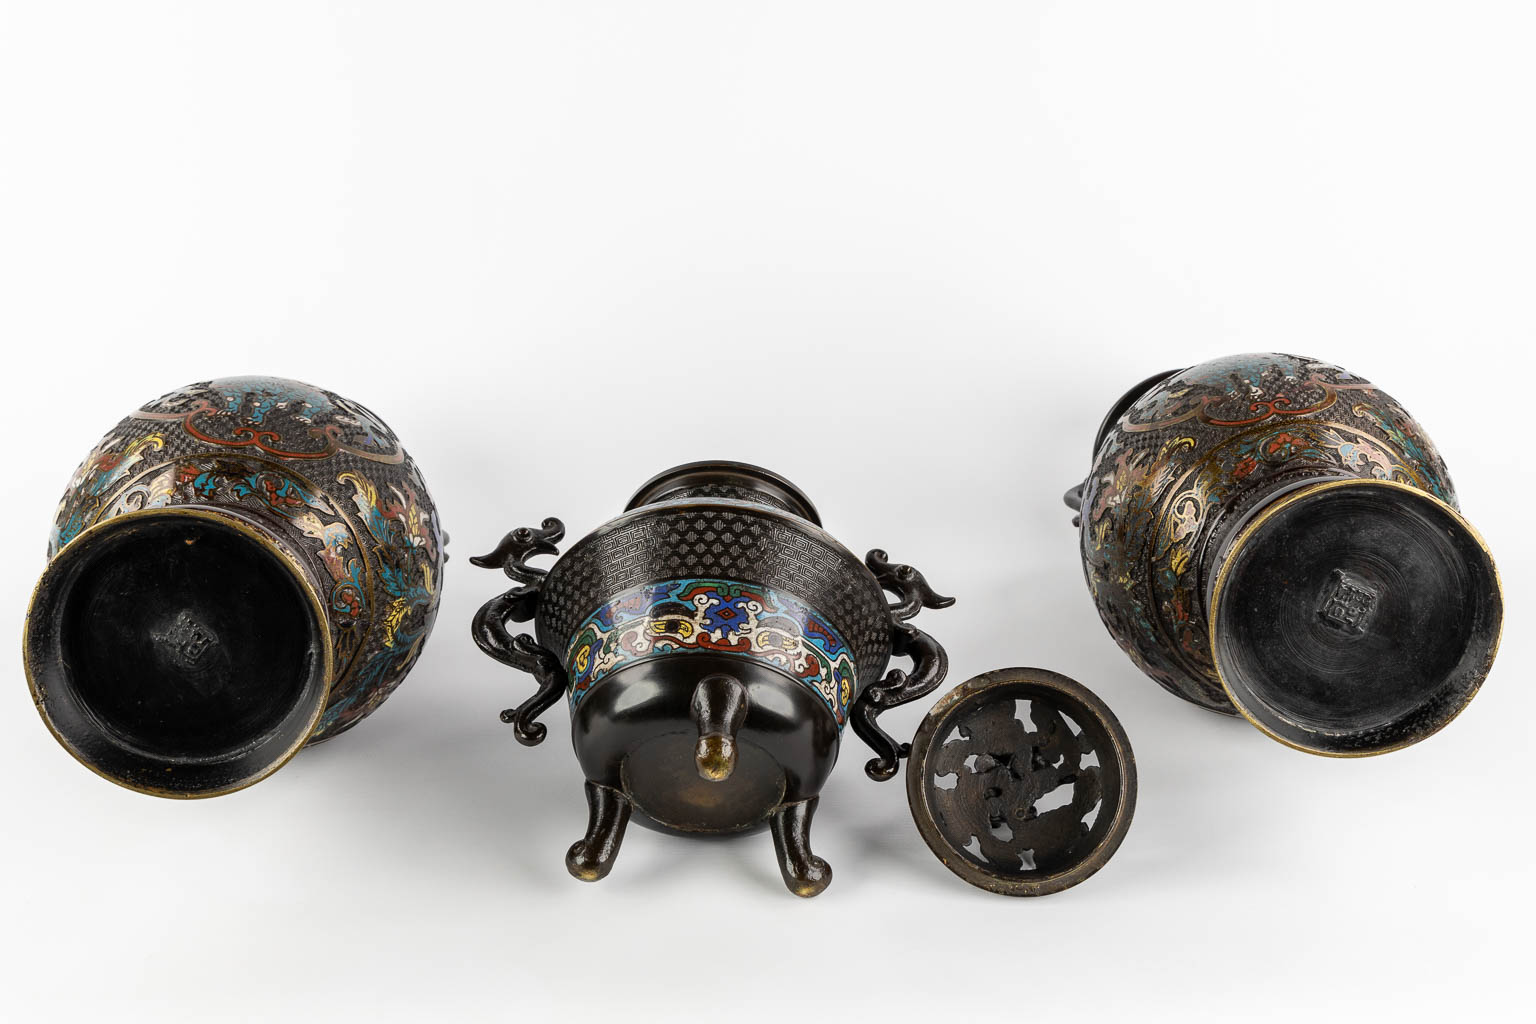 A pair of vases, added an insence burner, bronze with champslevé decor. Circa 1900. (H:45 x D:23 cm)